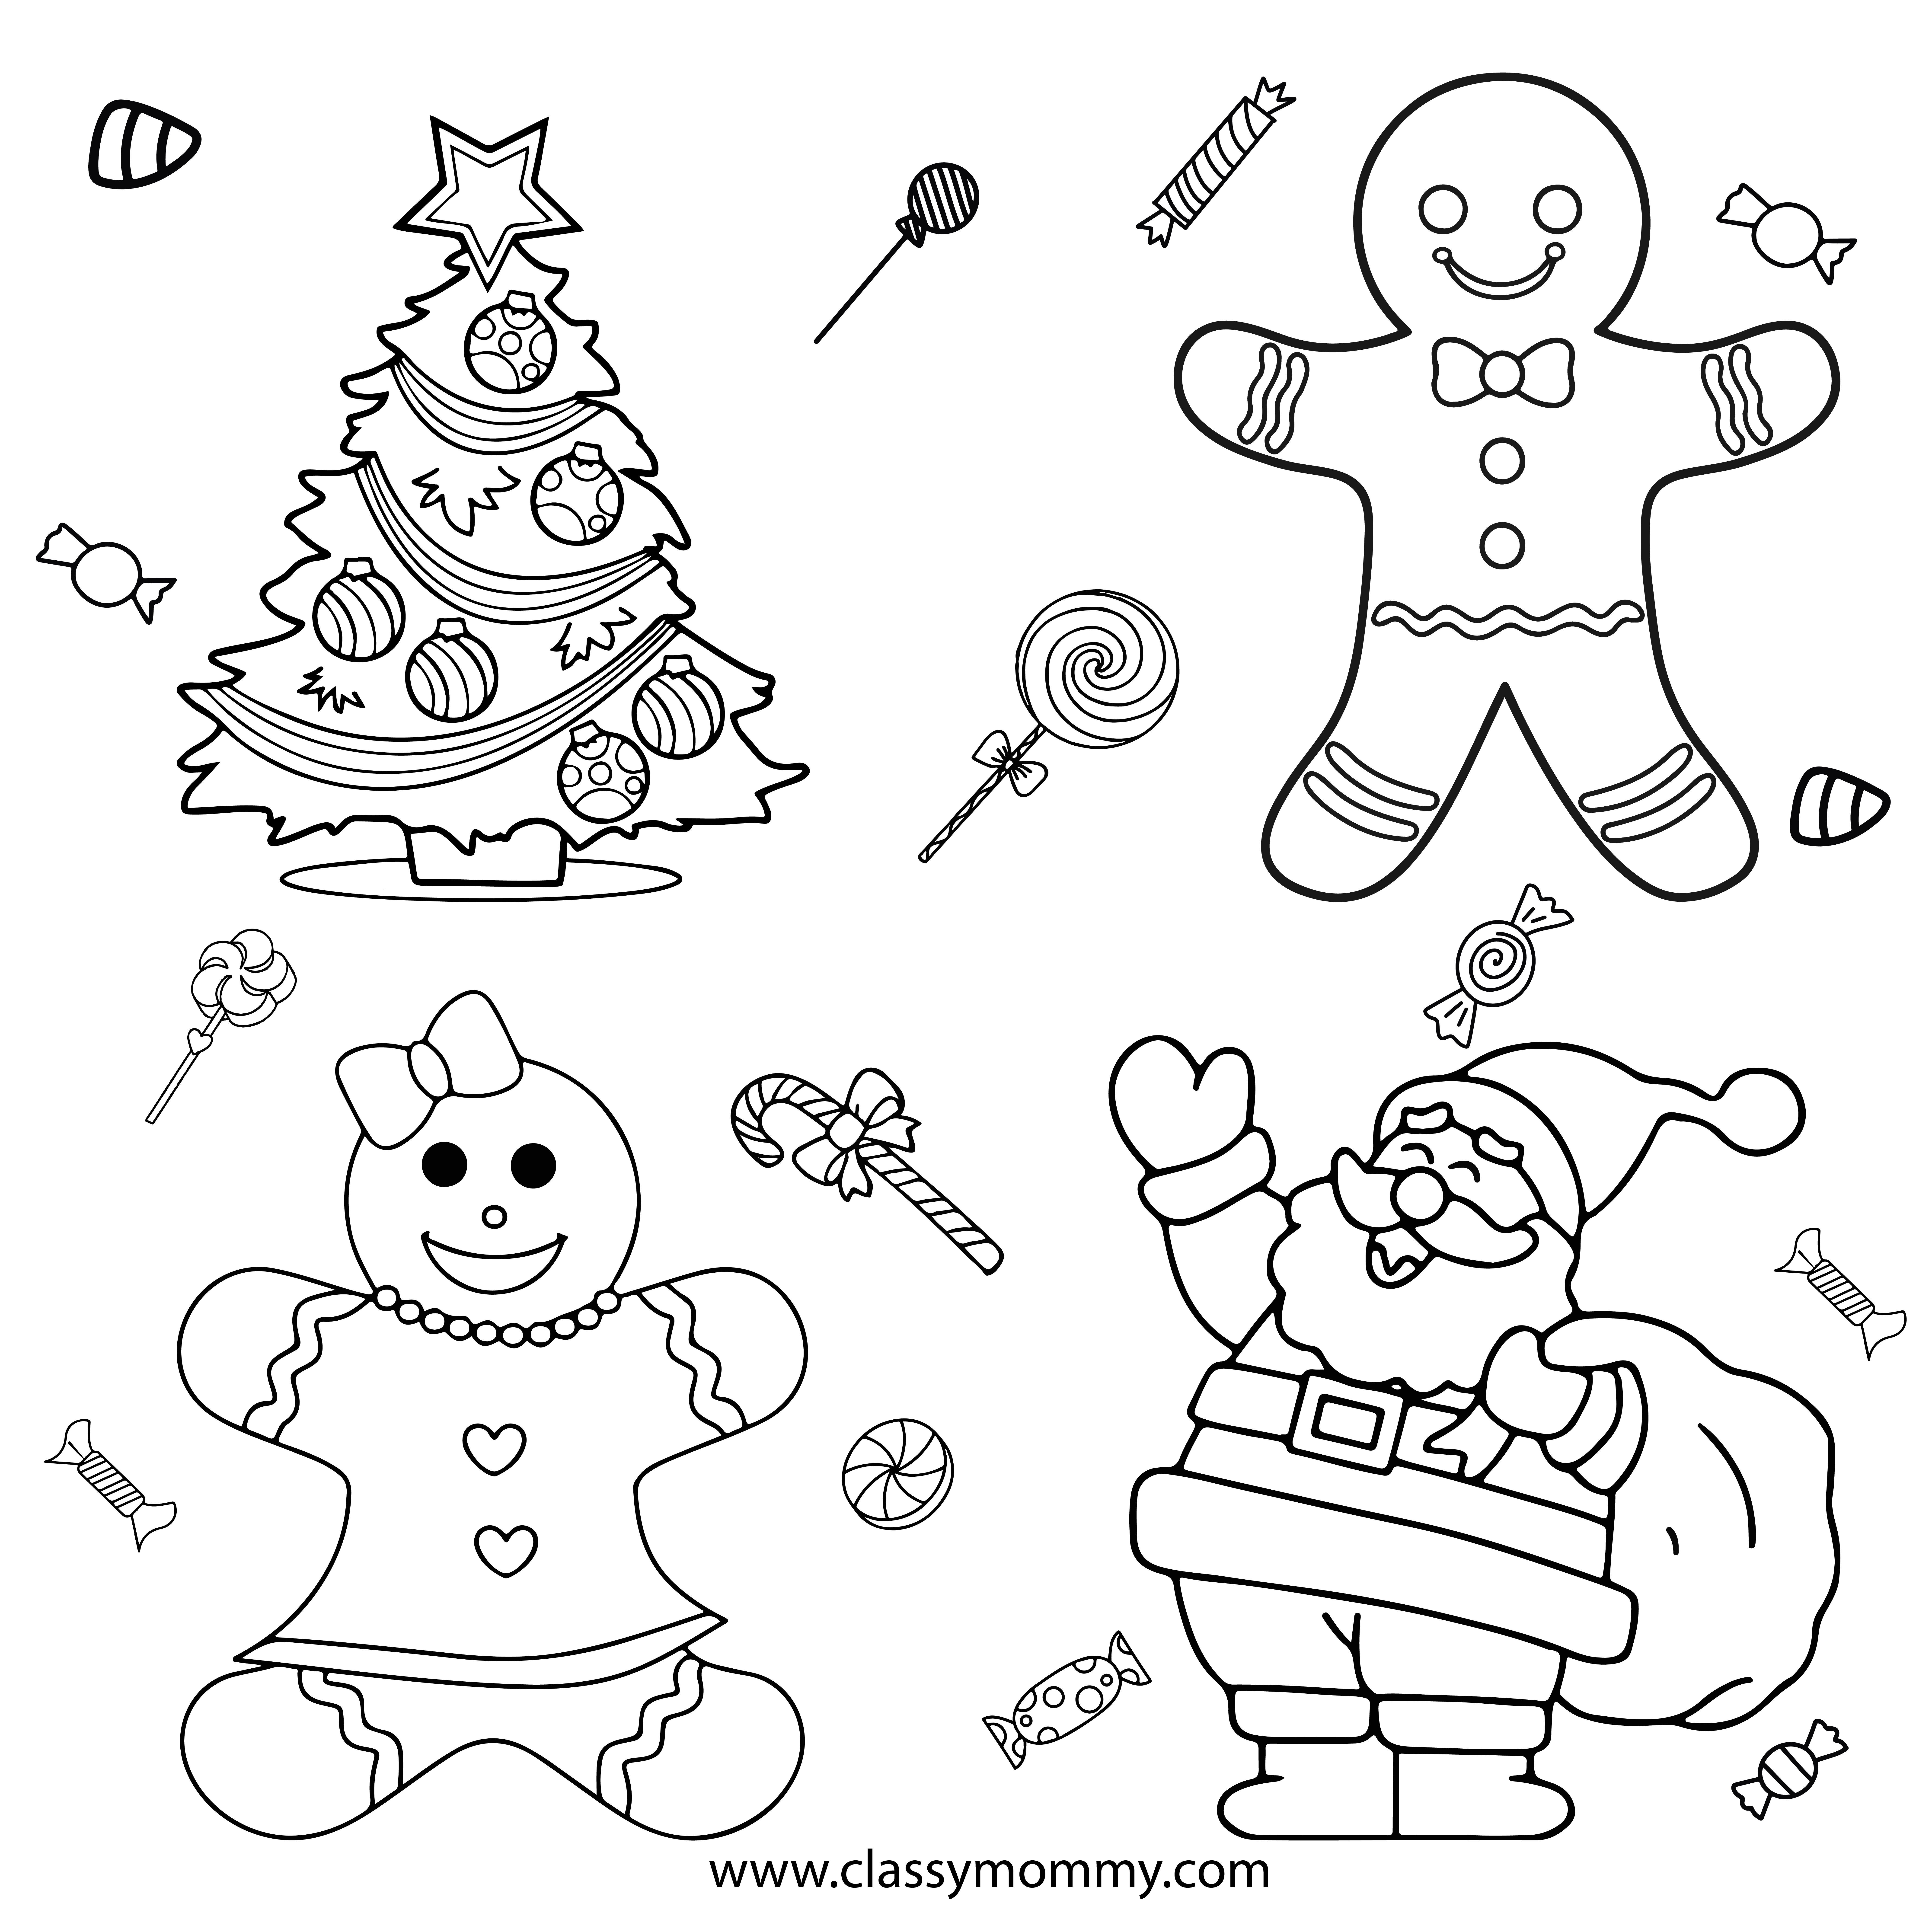 Here Comes Santa Claus Digital Coloring Page Instant Download